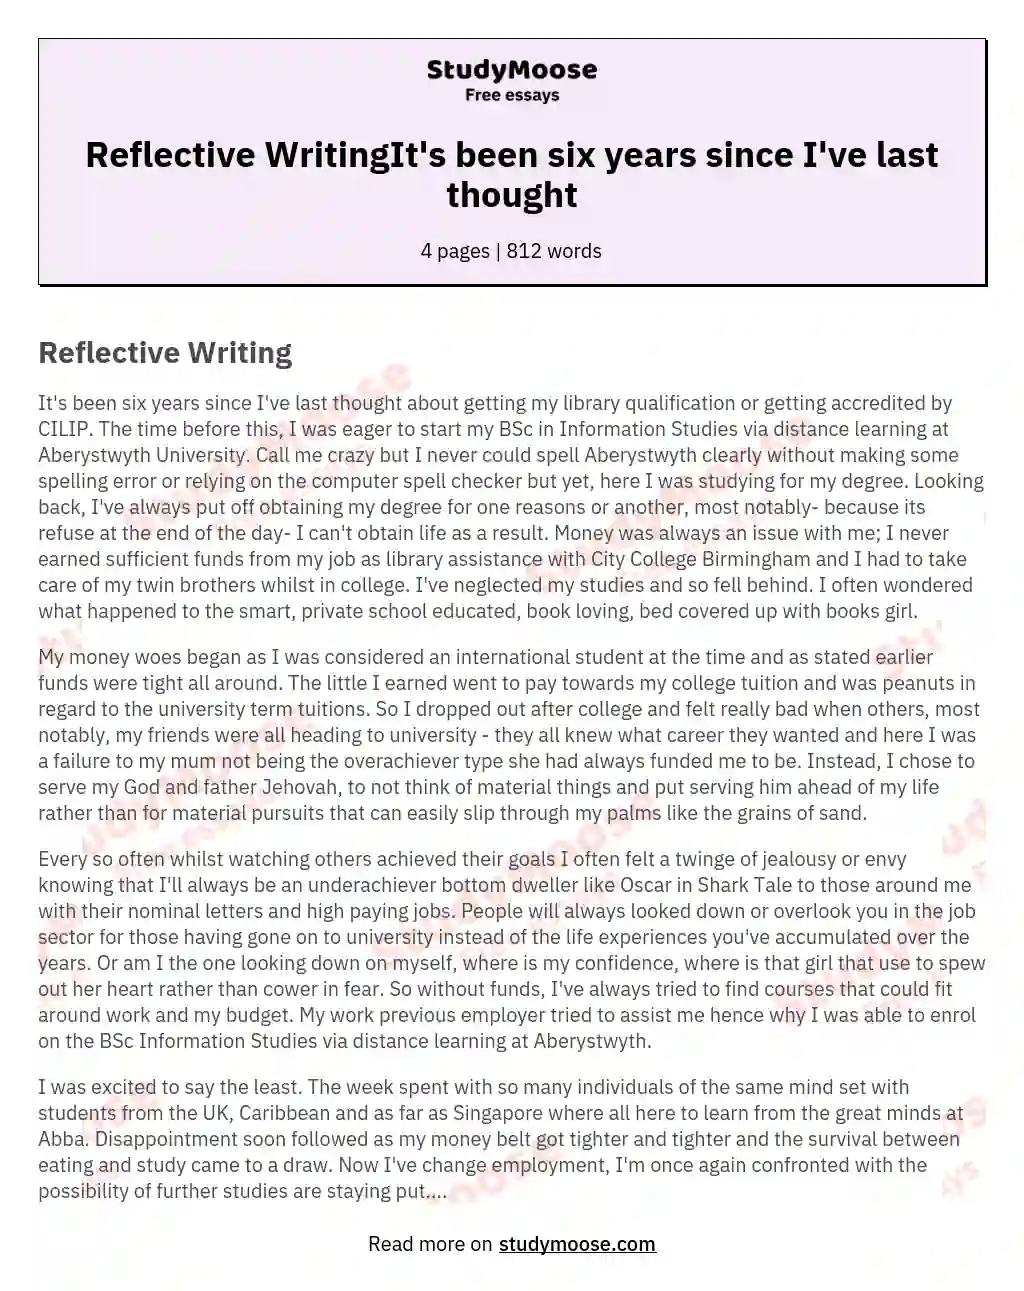 Reflective WritingIt's been six years since I've last thought